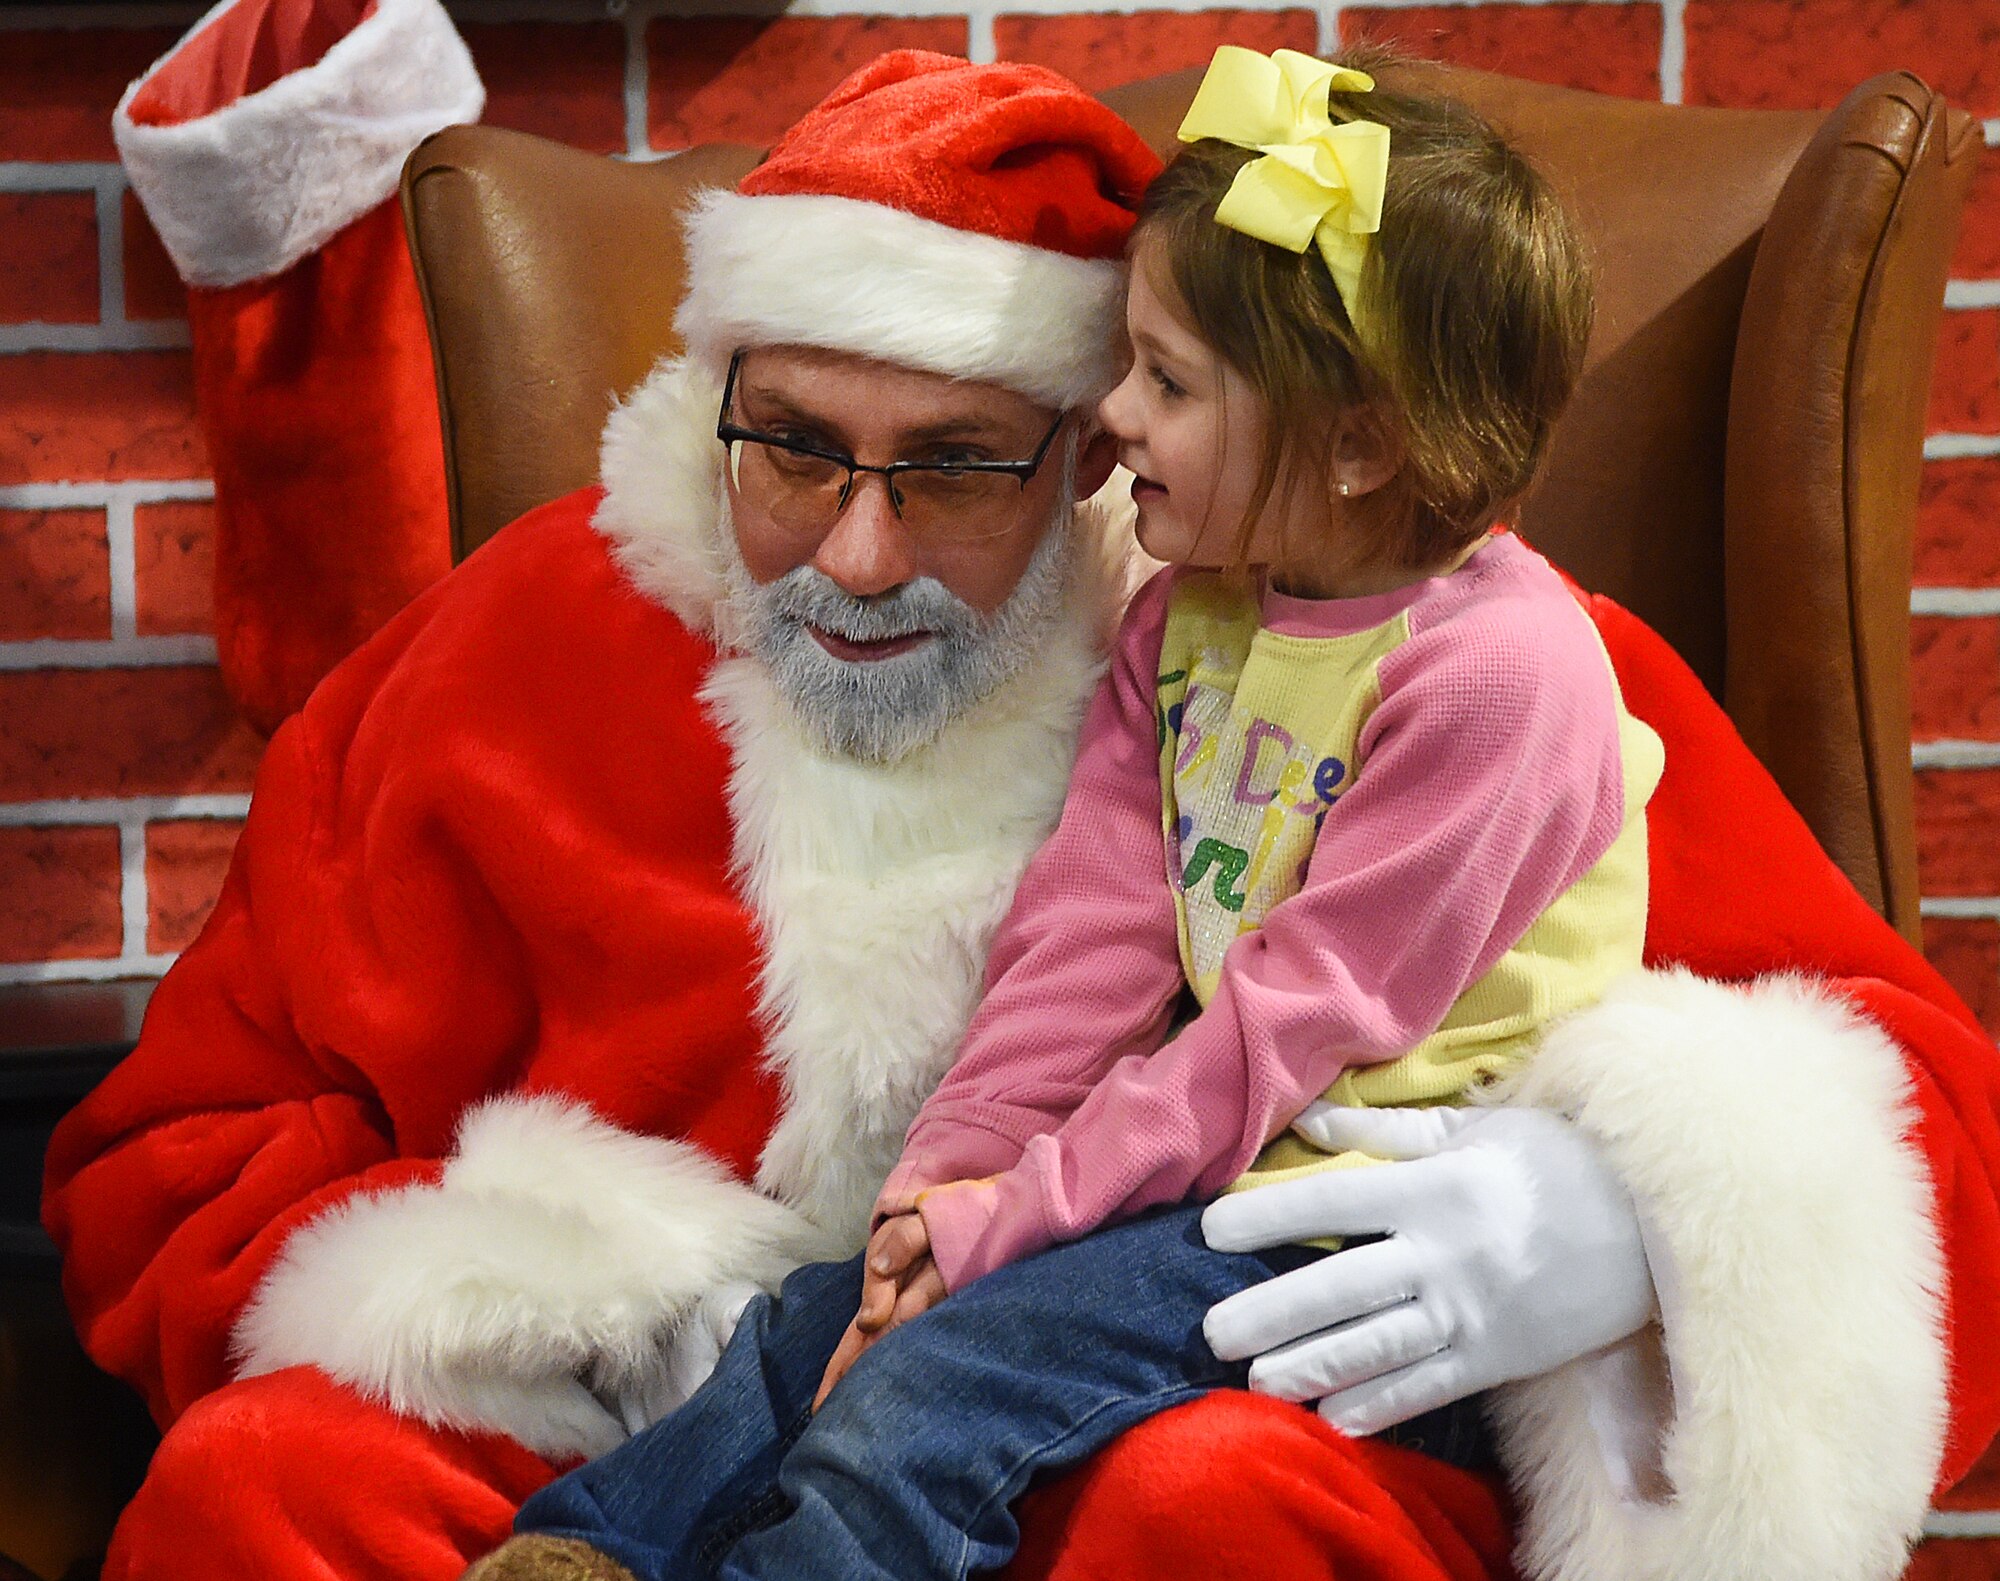 Brooklyn Houghton, 4, whispers into Santa's ear as he listens to what she wants for Christmas this year. Brooklyn, the daughter of Julie and Staff Sgt. Eric Houghton, Air Force Global Strike Command missile engineering office got the chance to visit with Santa Dec. 4, 2015, following the F.E. Warren Air Force Base, Wyo., annual tree lighting ceremony. (U.S. Air Force photo by R.J. Oriez.)